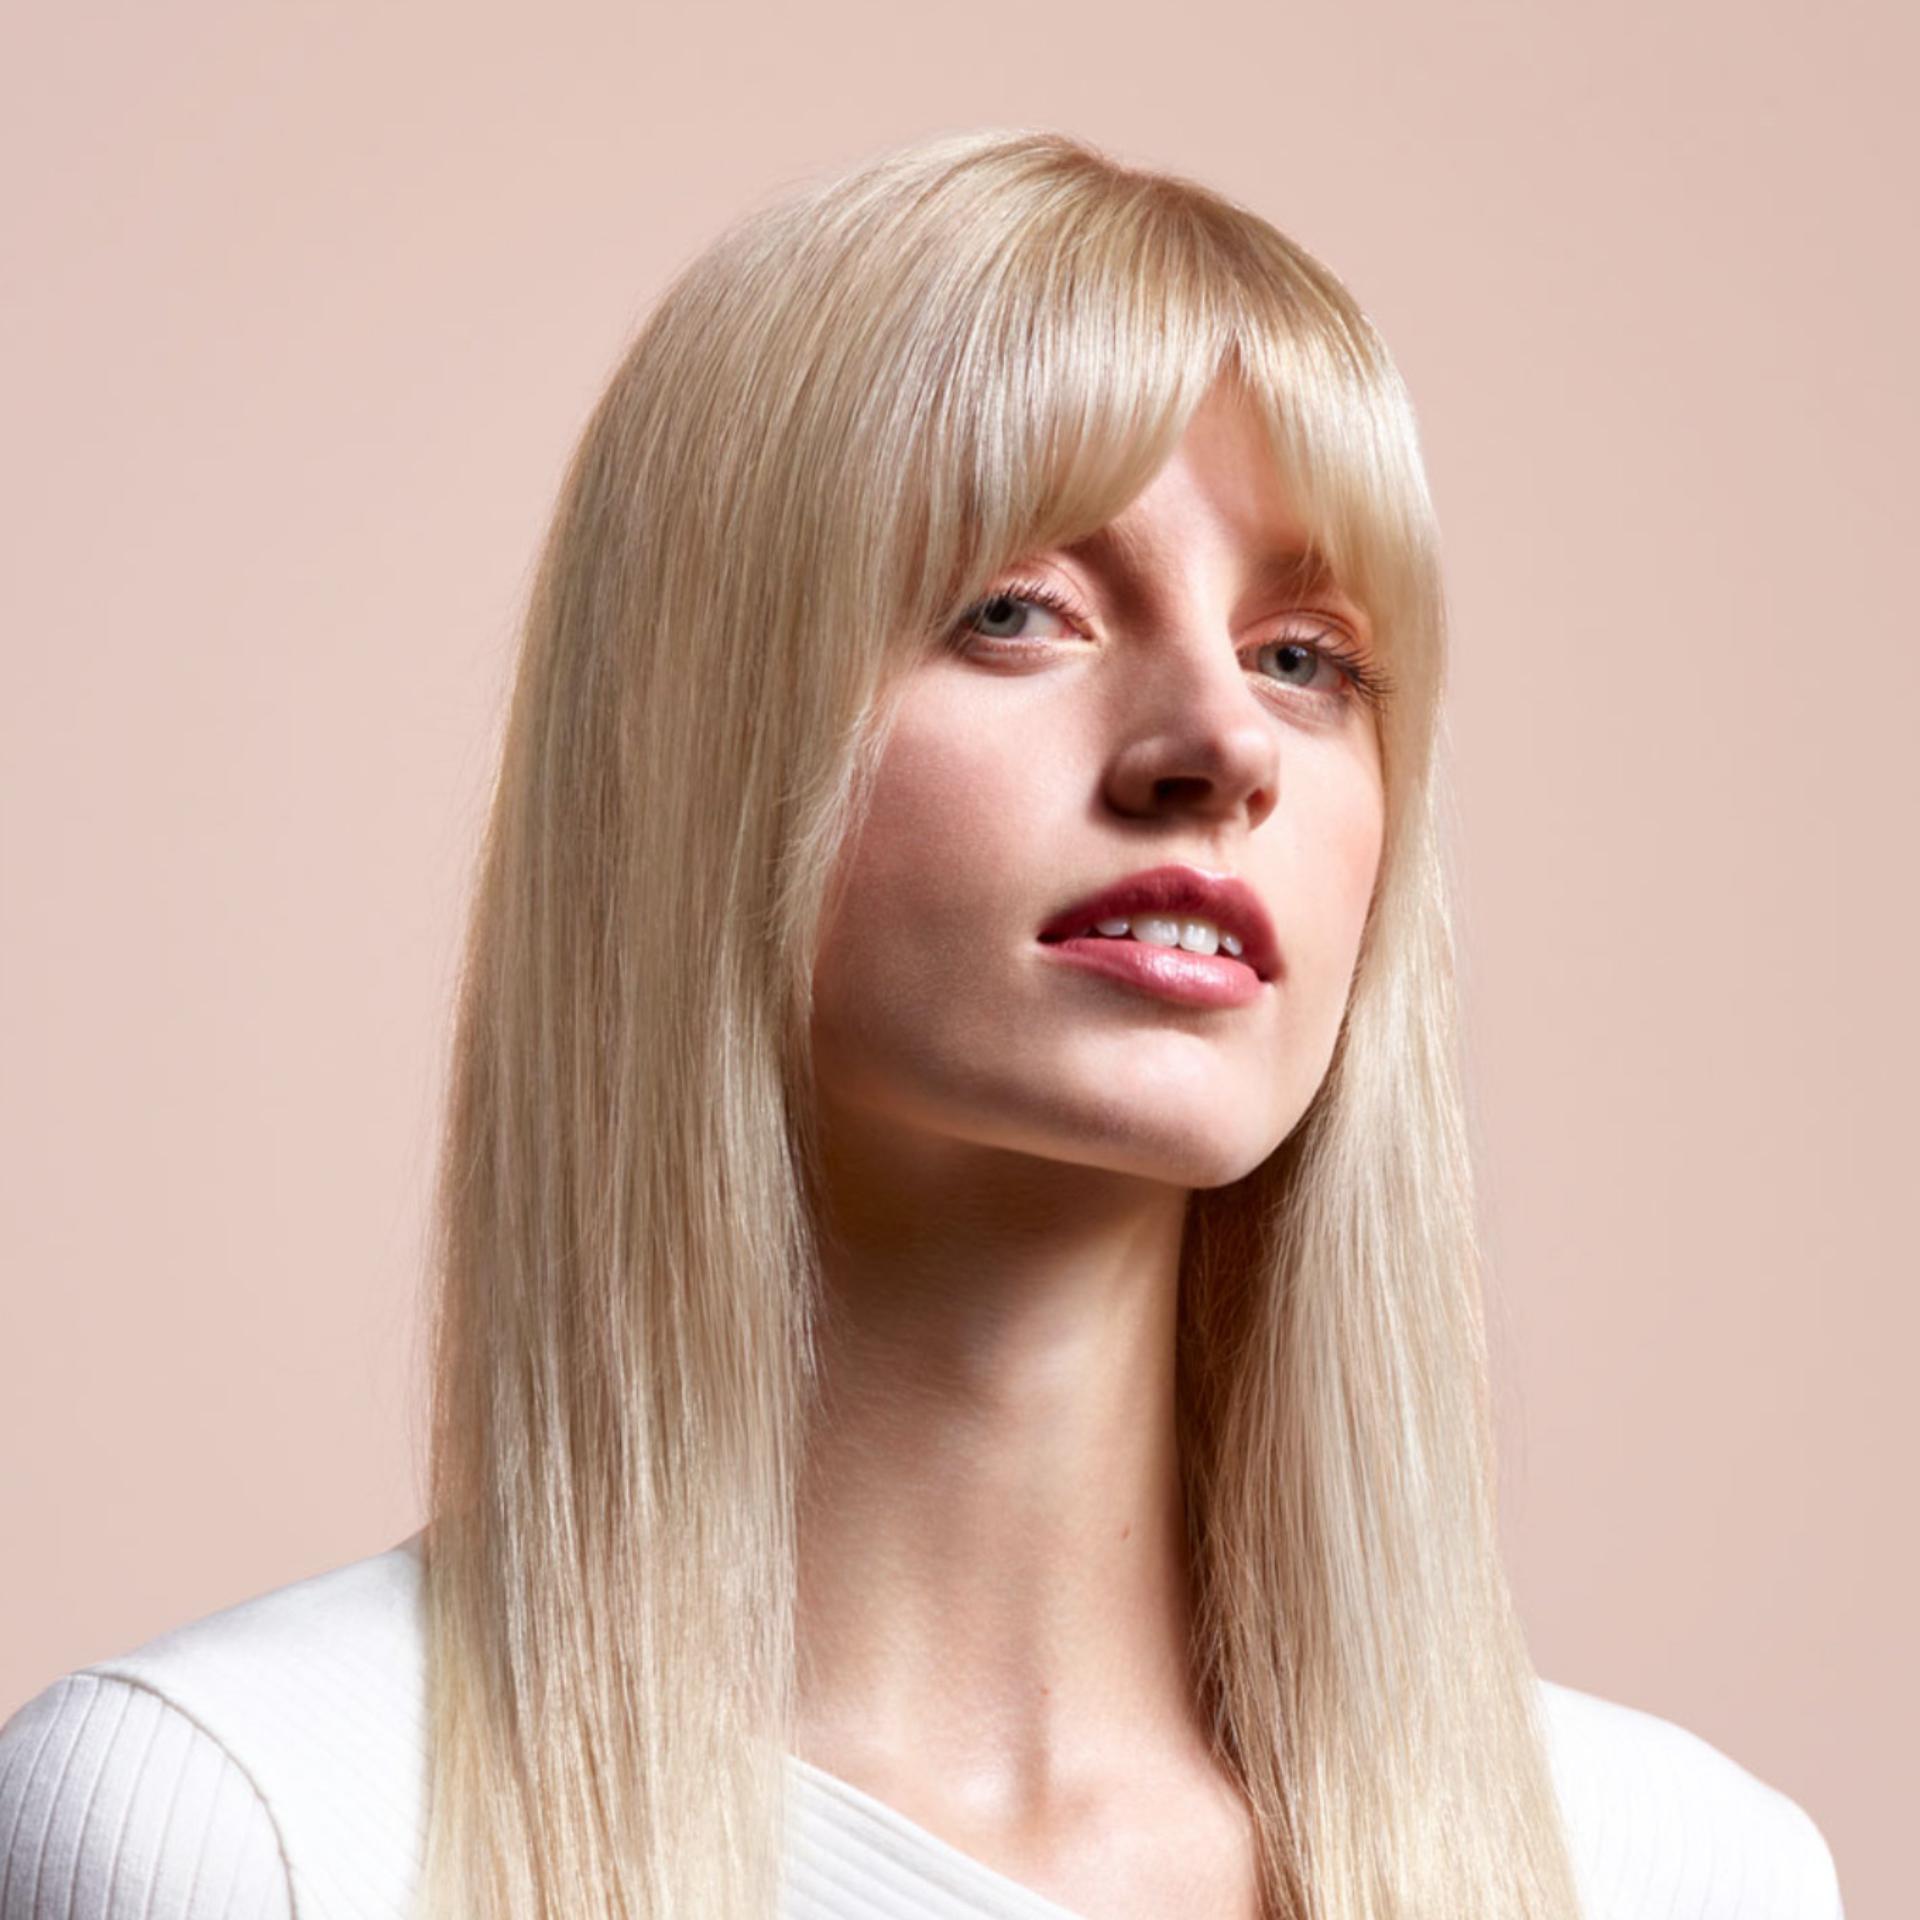 A model with long, blonde hair wearing a straight style.